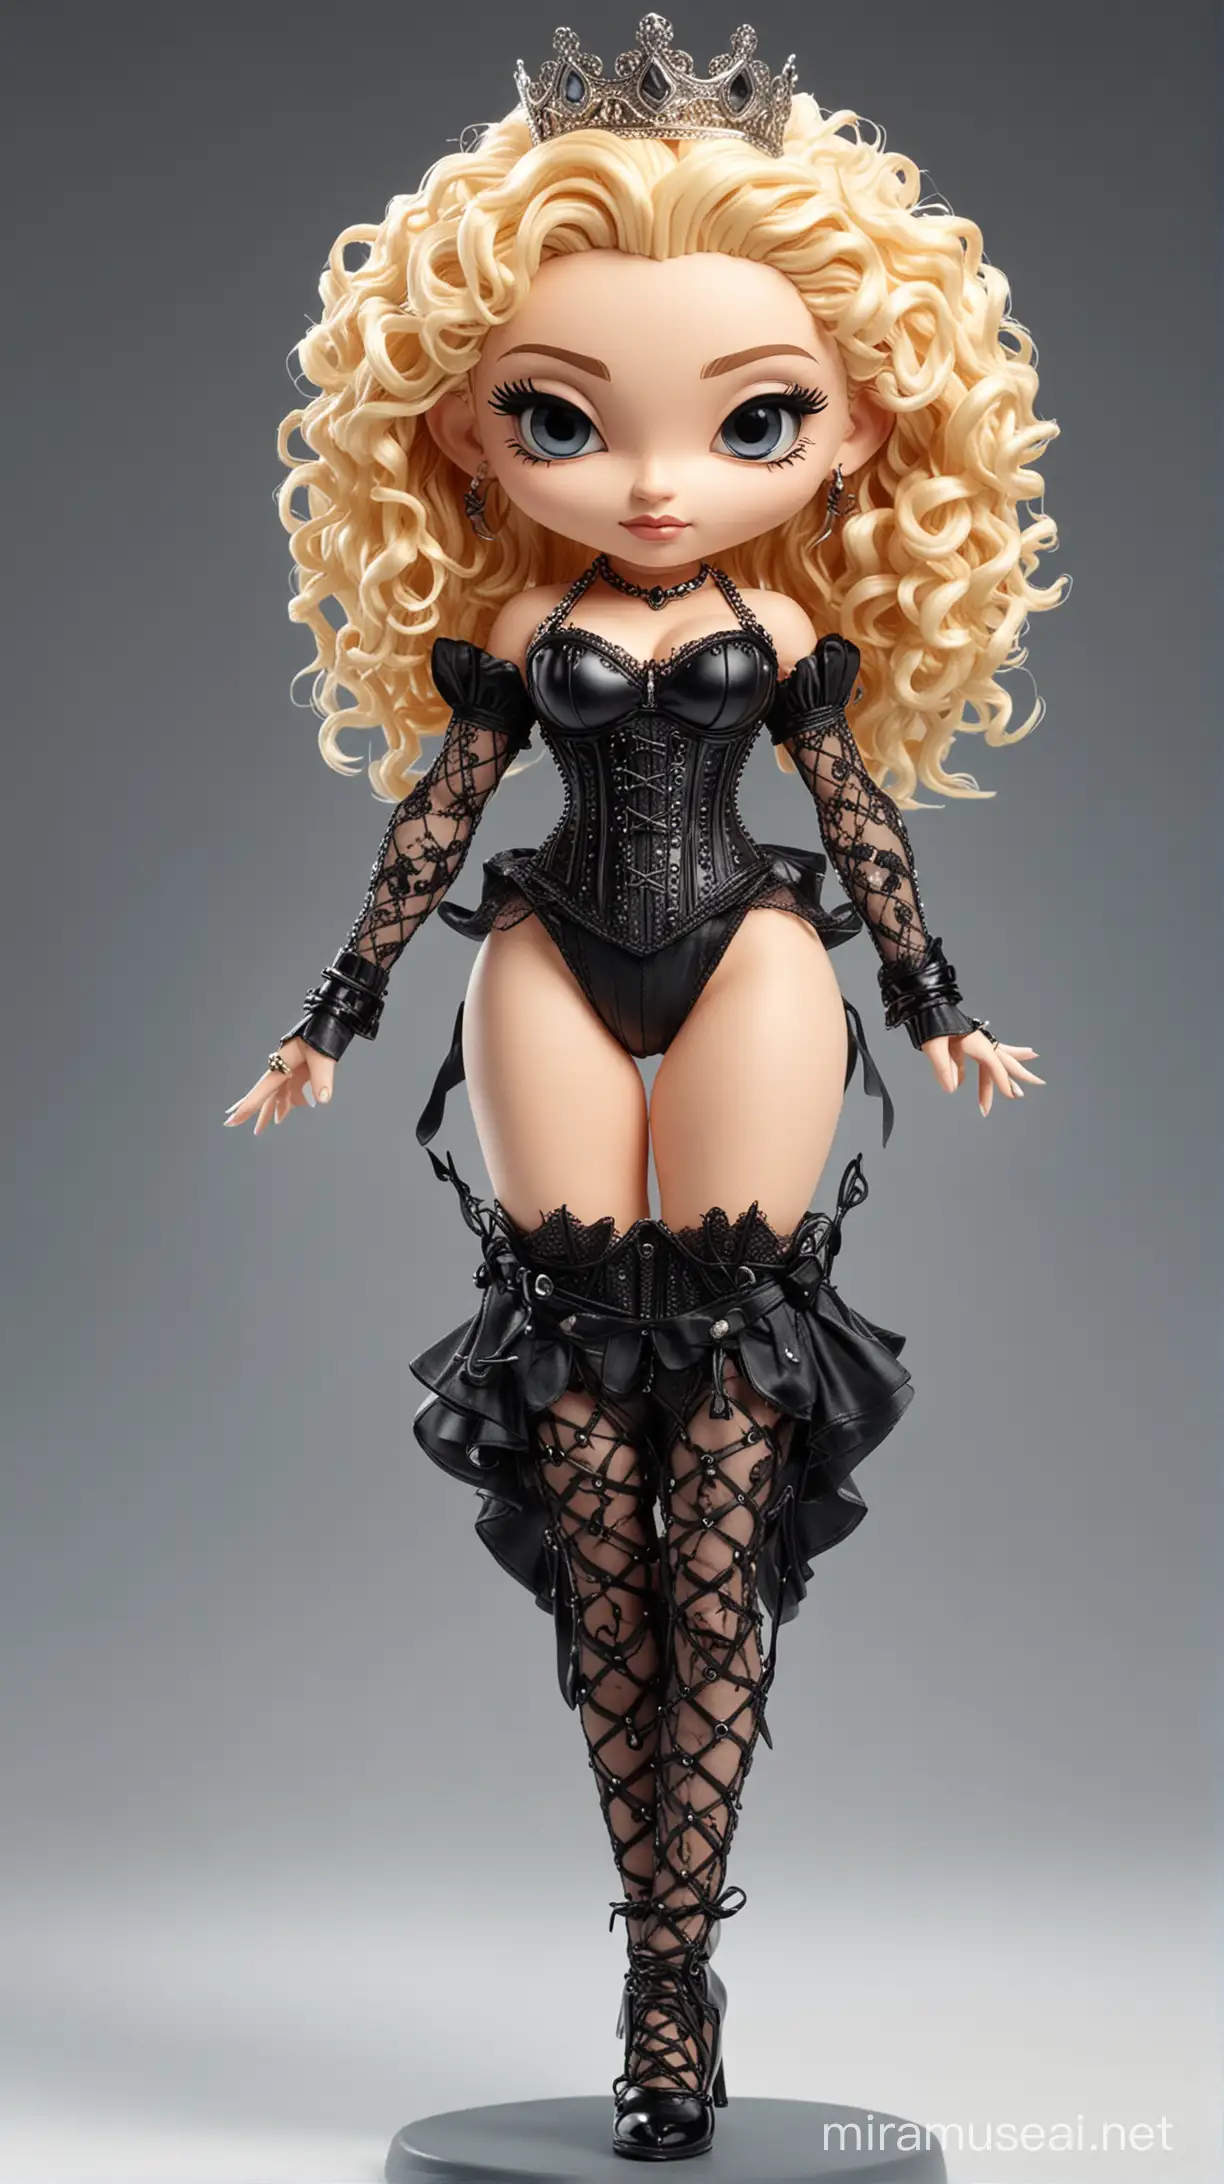 create a Chibi Nendotoid version of Madonna (singer and queen of pop) using a corset with a pointy bra from the 90s Designed by Jean paul Gaultier